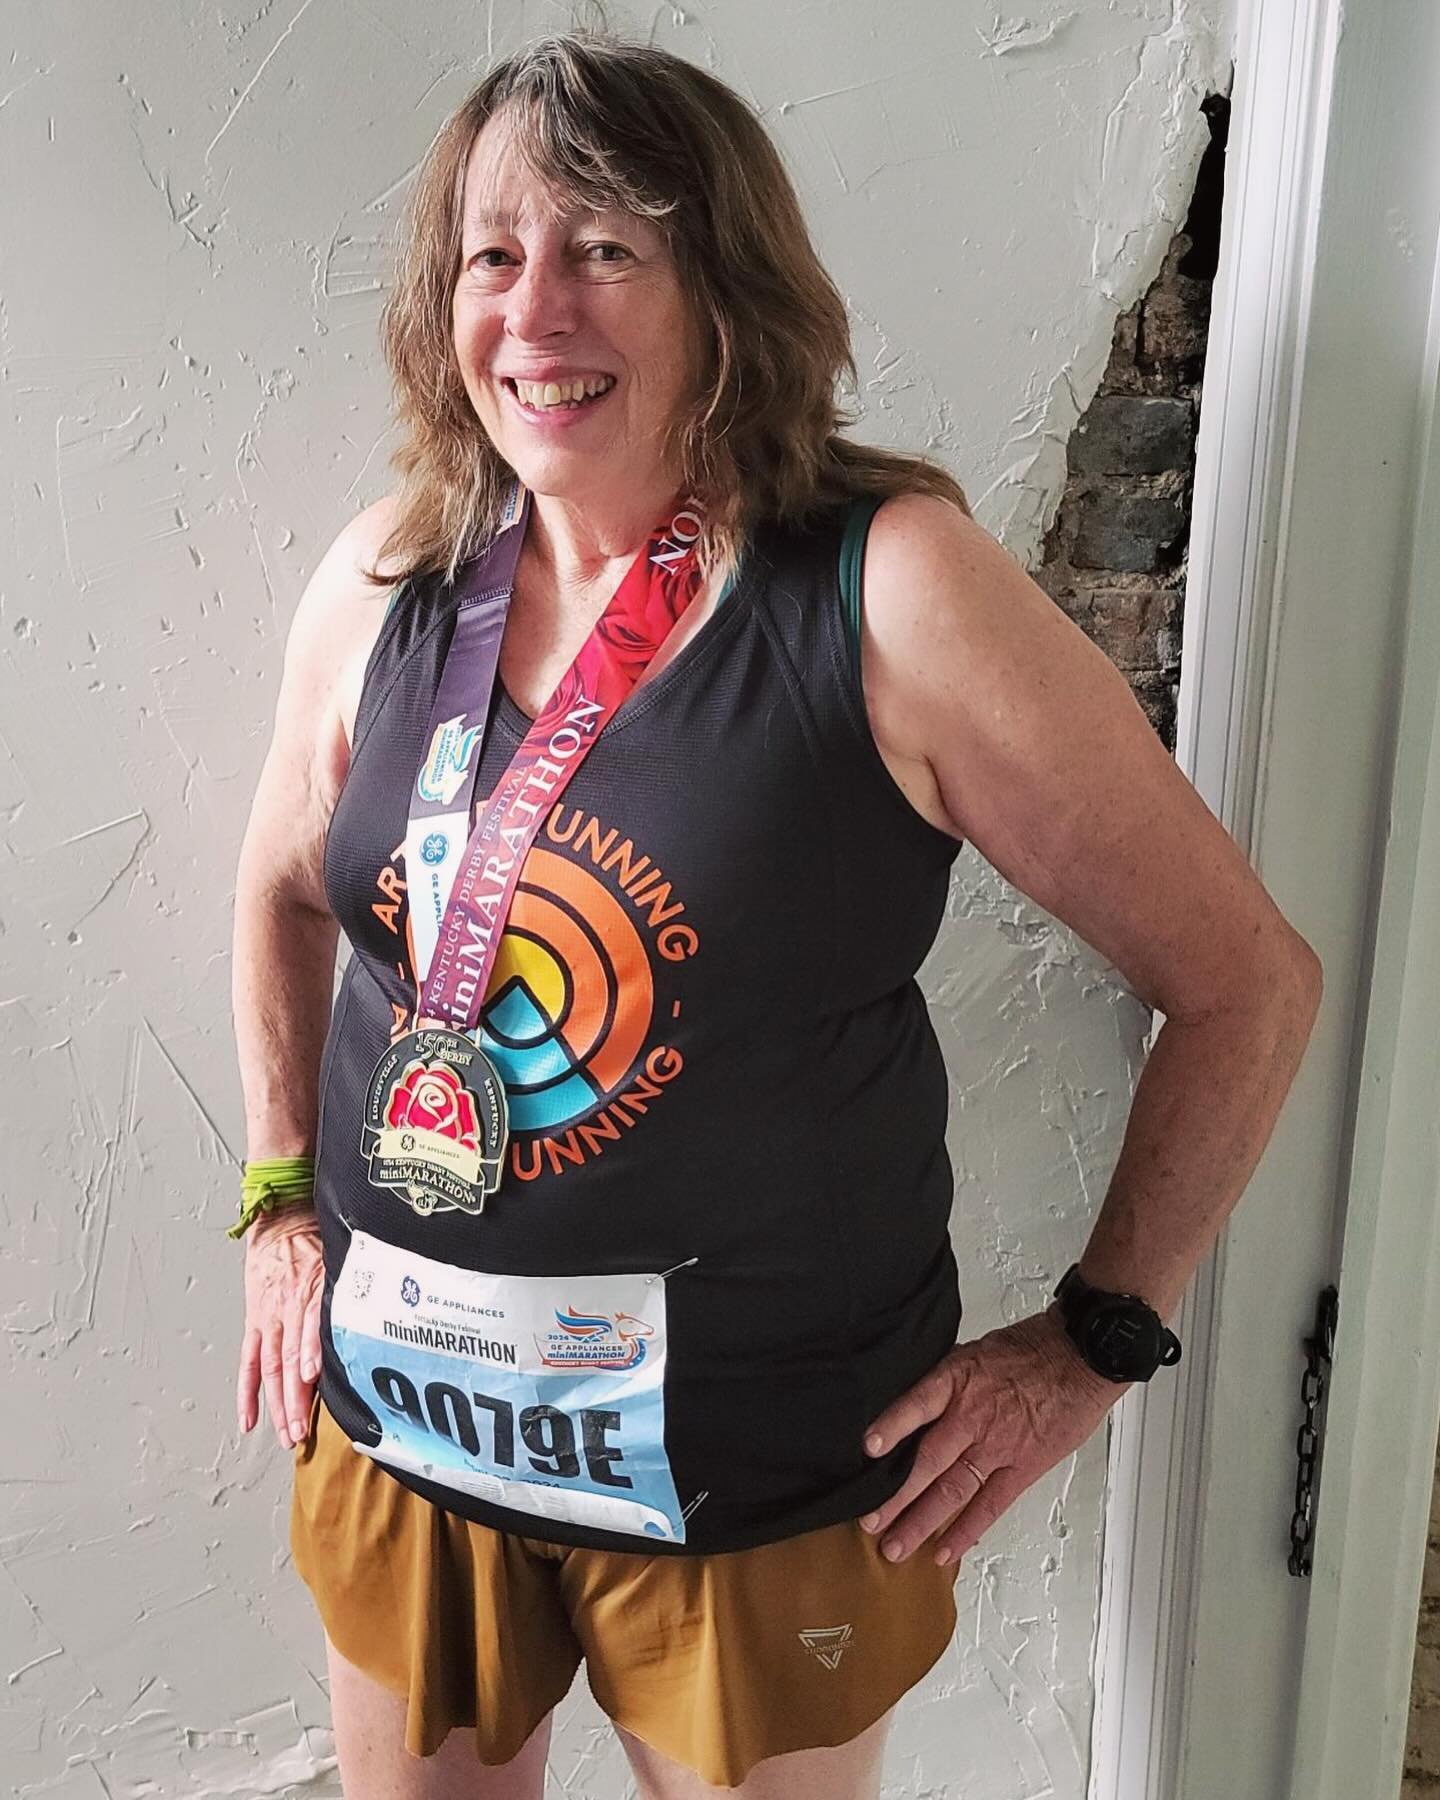 Happy Medal Monday! We&rsquo;re sending kudos and love to @saabsong, who ran the @kyderbyfestival miniMarathon (aka half marathon) this weekend! 🧡🏅🧡 

Melody works diligently and consistently in training, and she pushes for her very best in races!